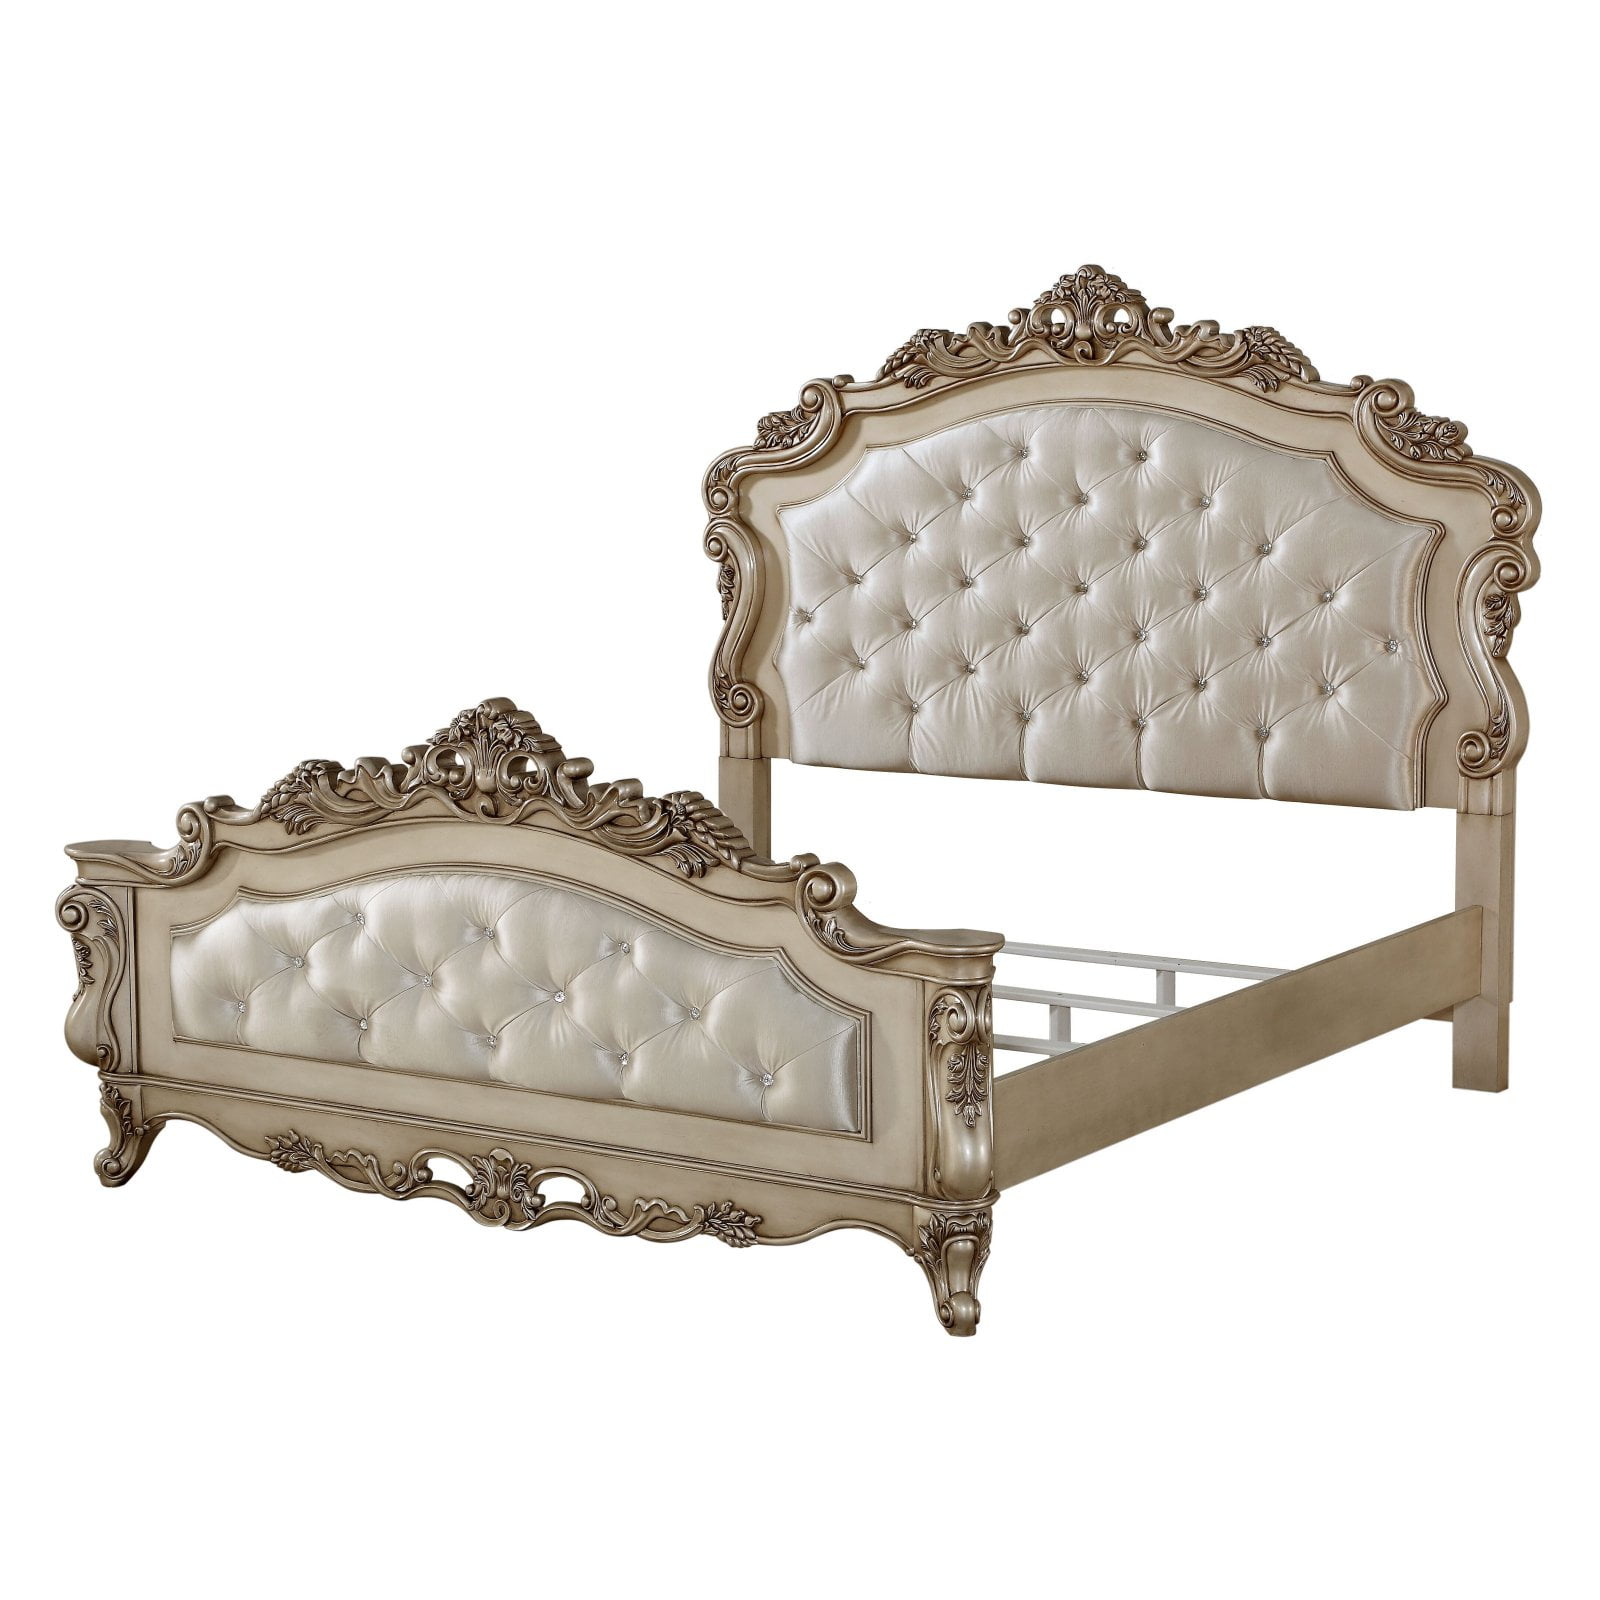 Picture of ACME 27434CK 3 Piece Gorsedd California King Size Bed - Fabric & Antique White - 72 x 96 x 86 in.